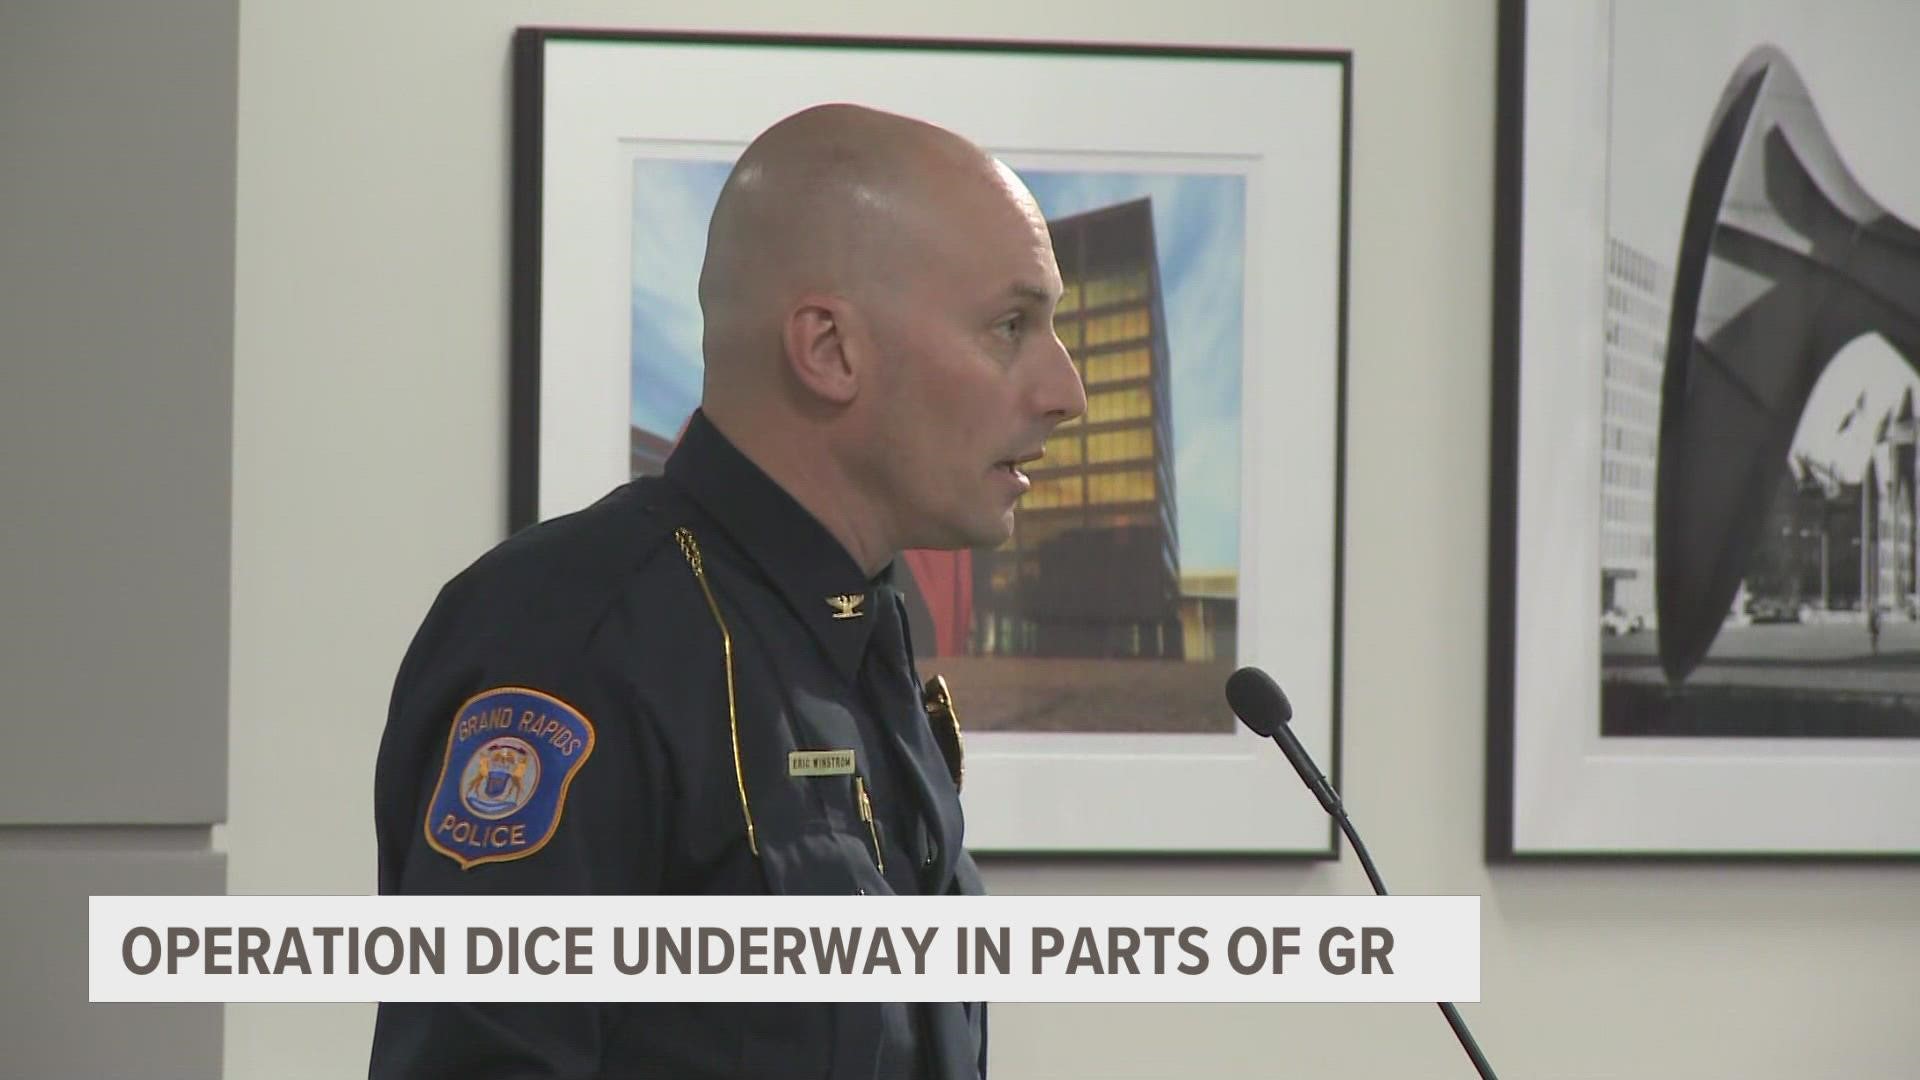 Grand Rapids Police Chief Eric Winstrom shared an update on the pilot DICE (Data Informed Community Engagement) program Tuesday morning.